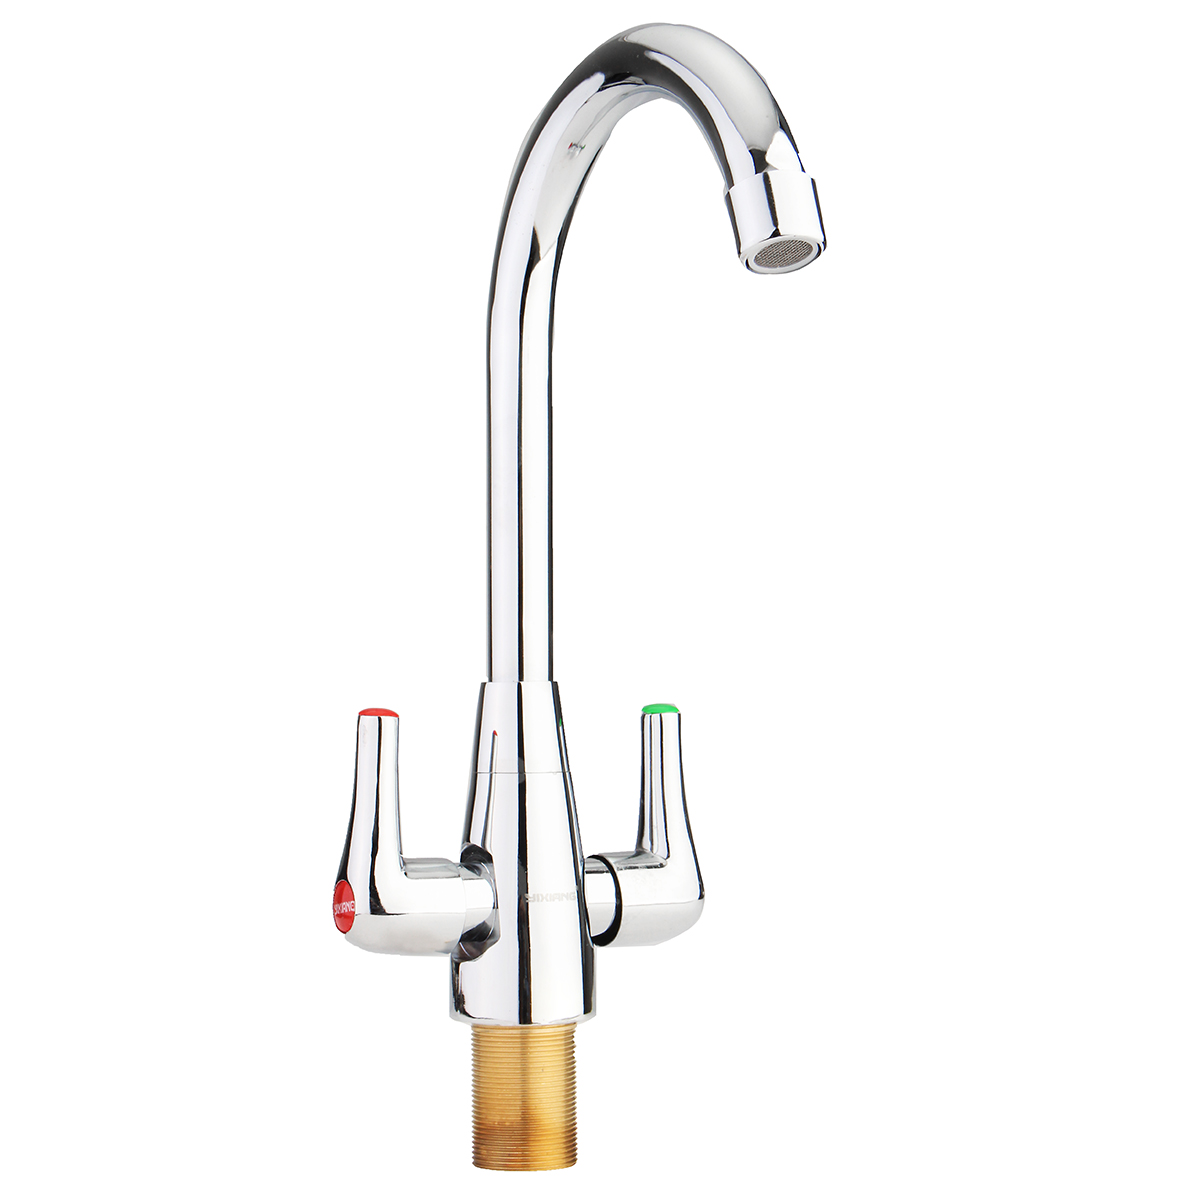 

Brass Chrome Finish Kitchen Sink Faucet 360° Rotate Neck Spout Double Handle Water Mixer Tap